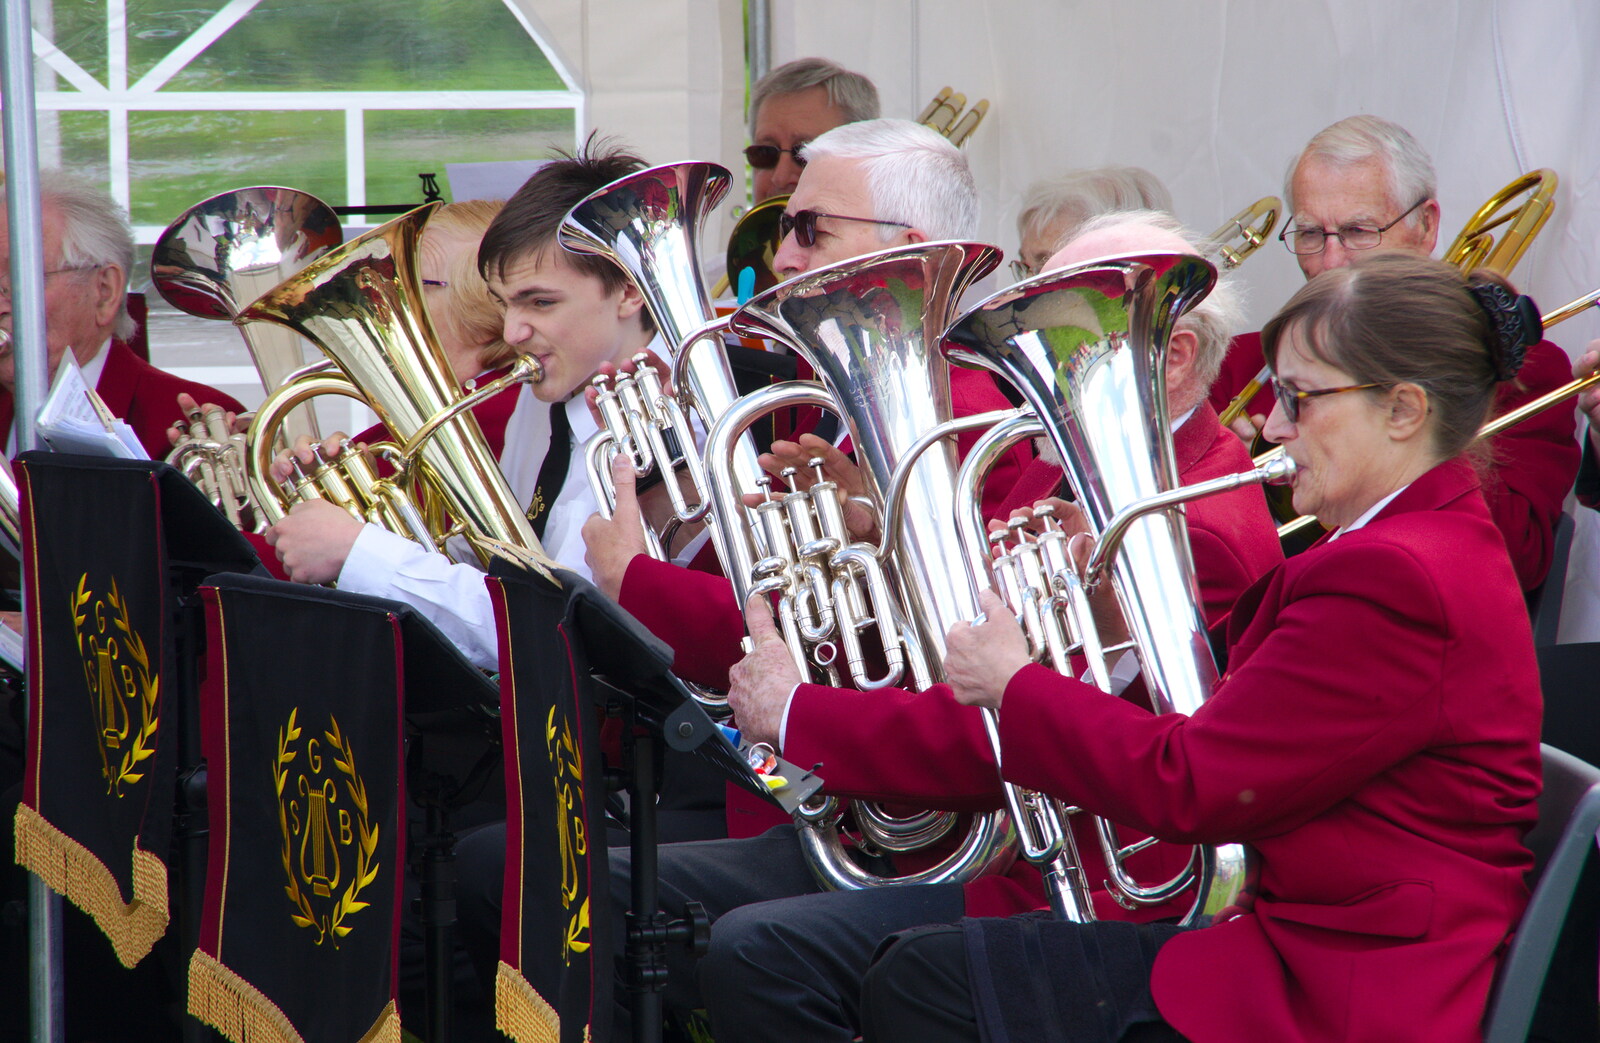 The horn section of the band from The Gislingham Silver Band at the Village Hall, Gislingham, Suffolk - 12th May 2019